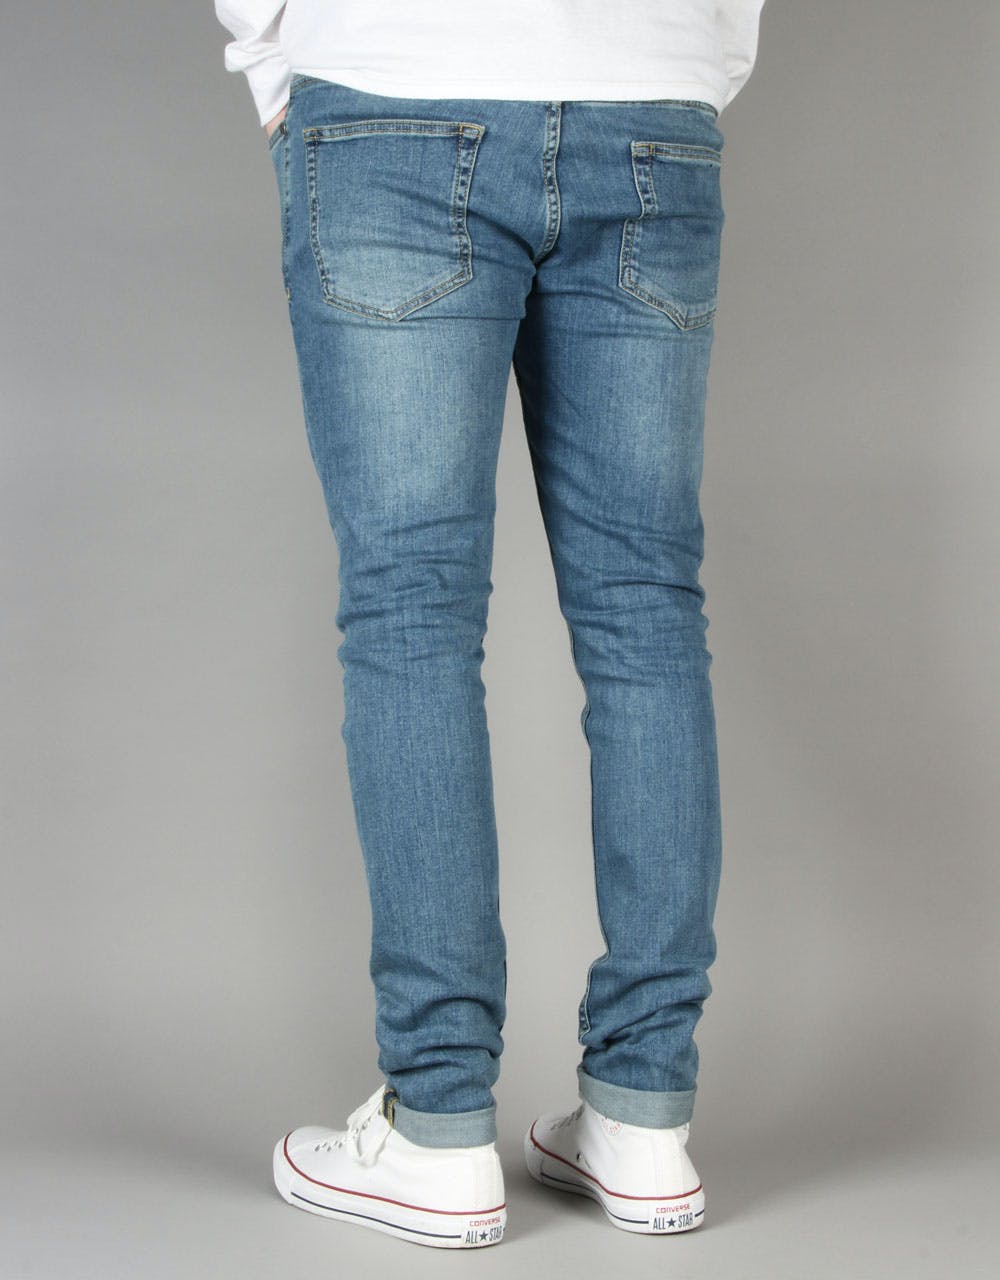 Route One Super Skinny Denim Jeans - Washed Blue